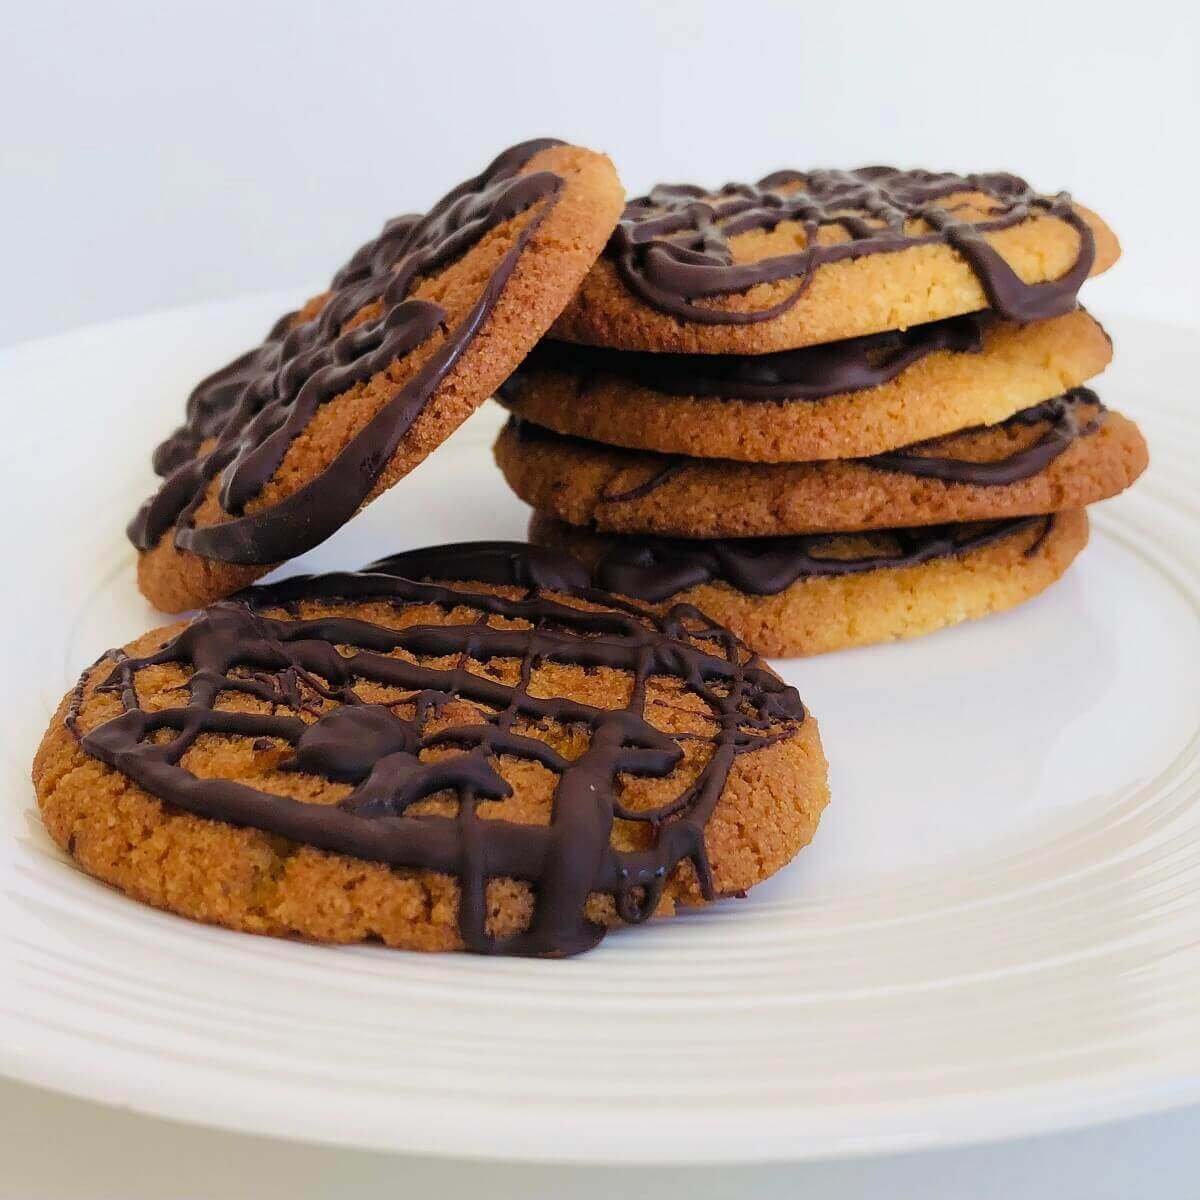 Six vegan olive oil cookies arranged on a white plate.